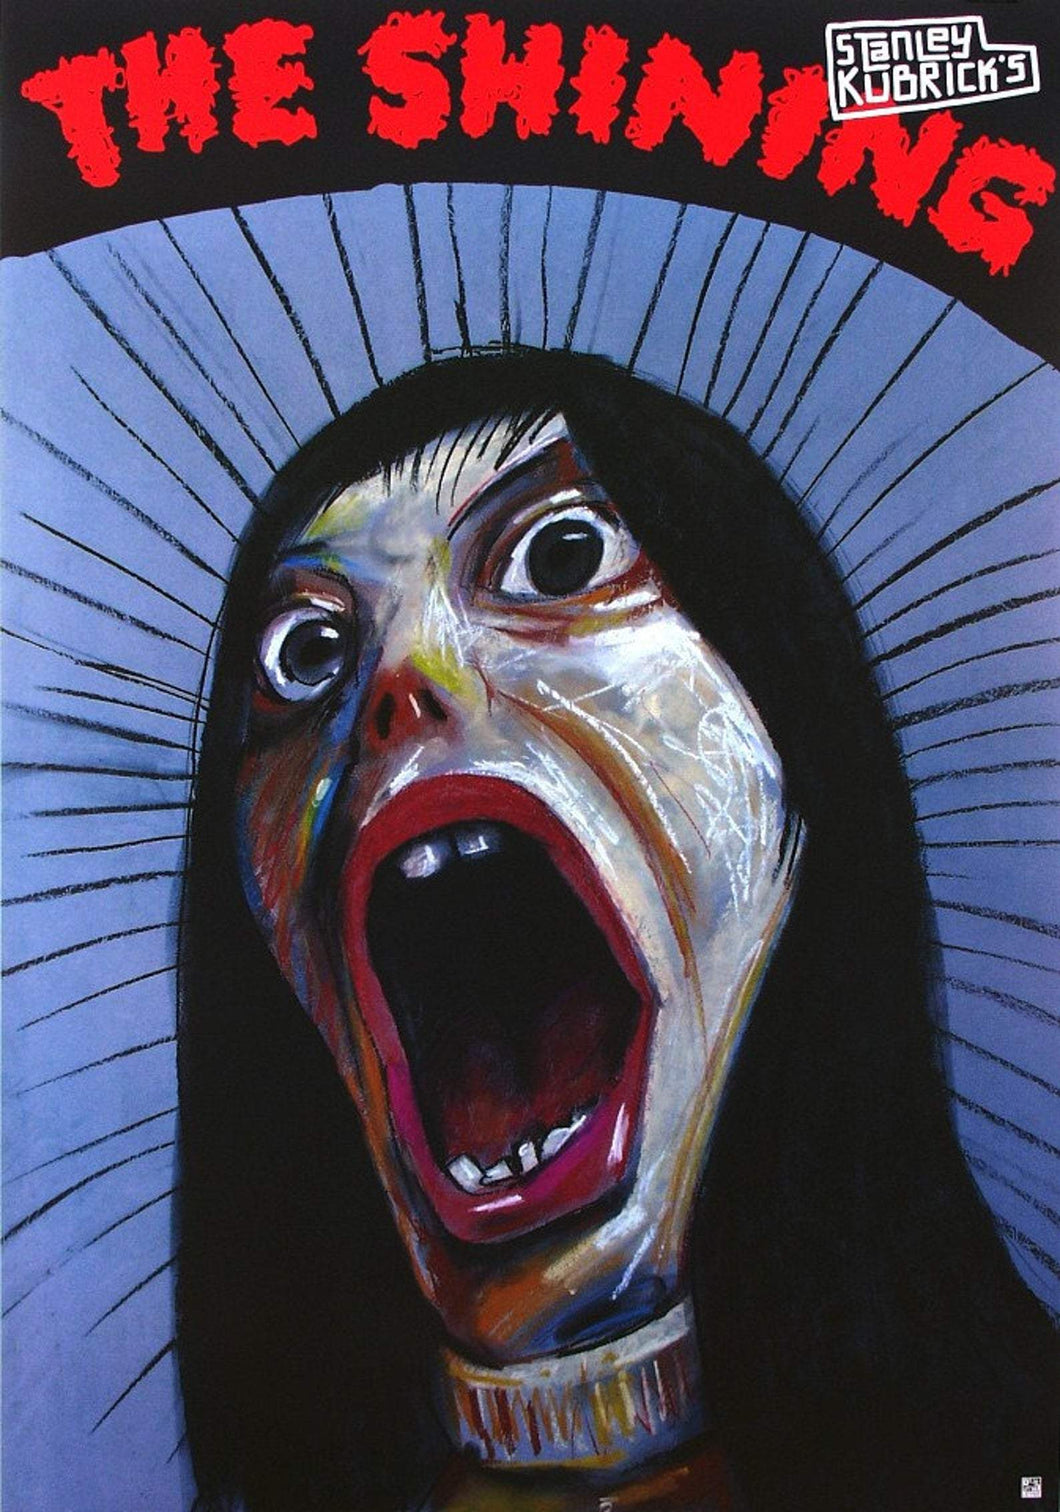 THE SHINING Polish Poster - Czech Film Poster Gallery